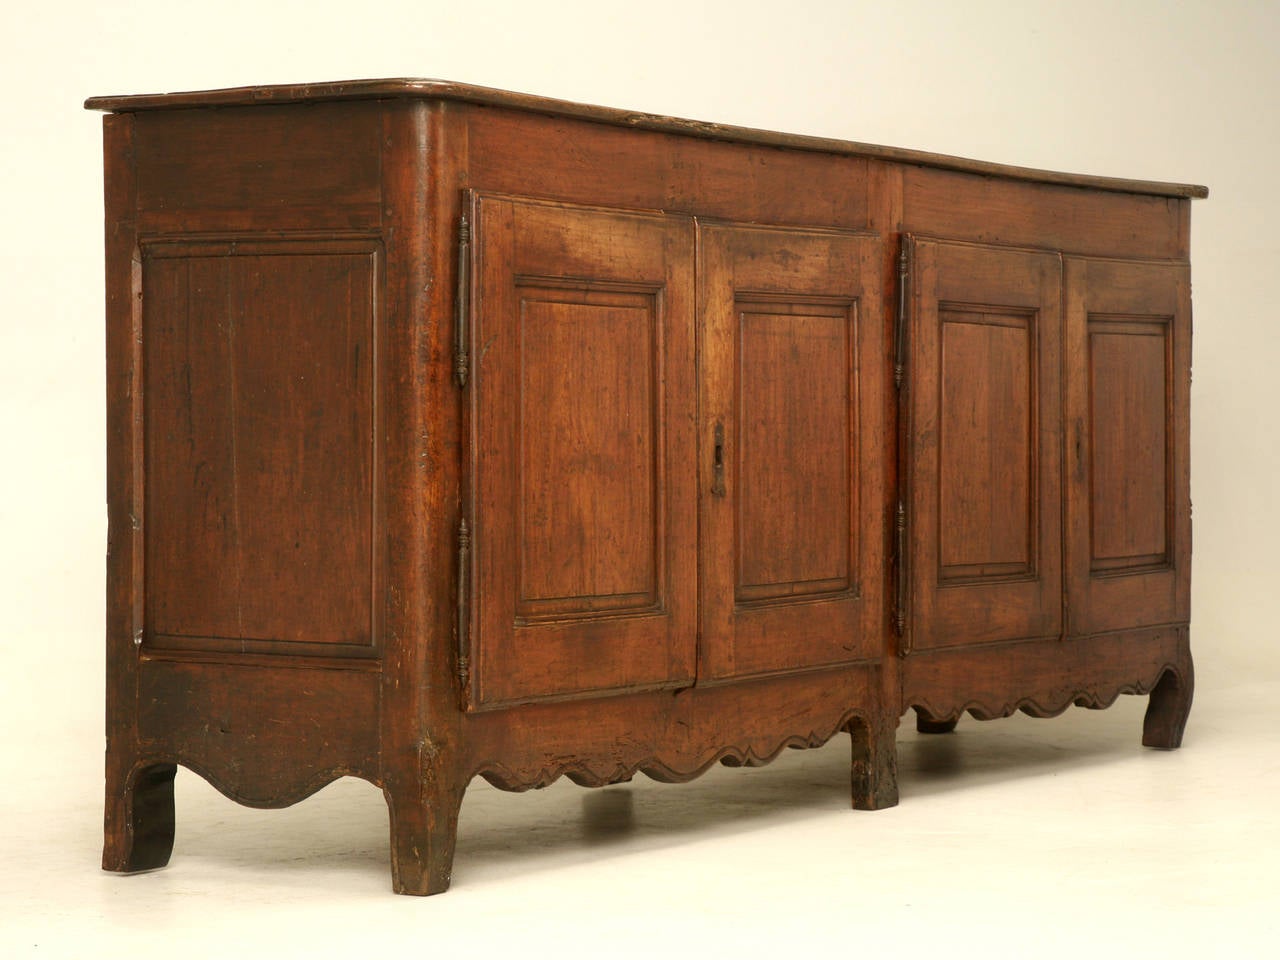 Found in the Midi-Pyrenees region of France, in an unbelievable untouched state. Rare does not aptly describe the finish on this buffet, for no one in over 200 years has tried to refinish it. 
Constructed of French cherrywood in the late 1700s, our